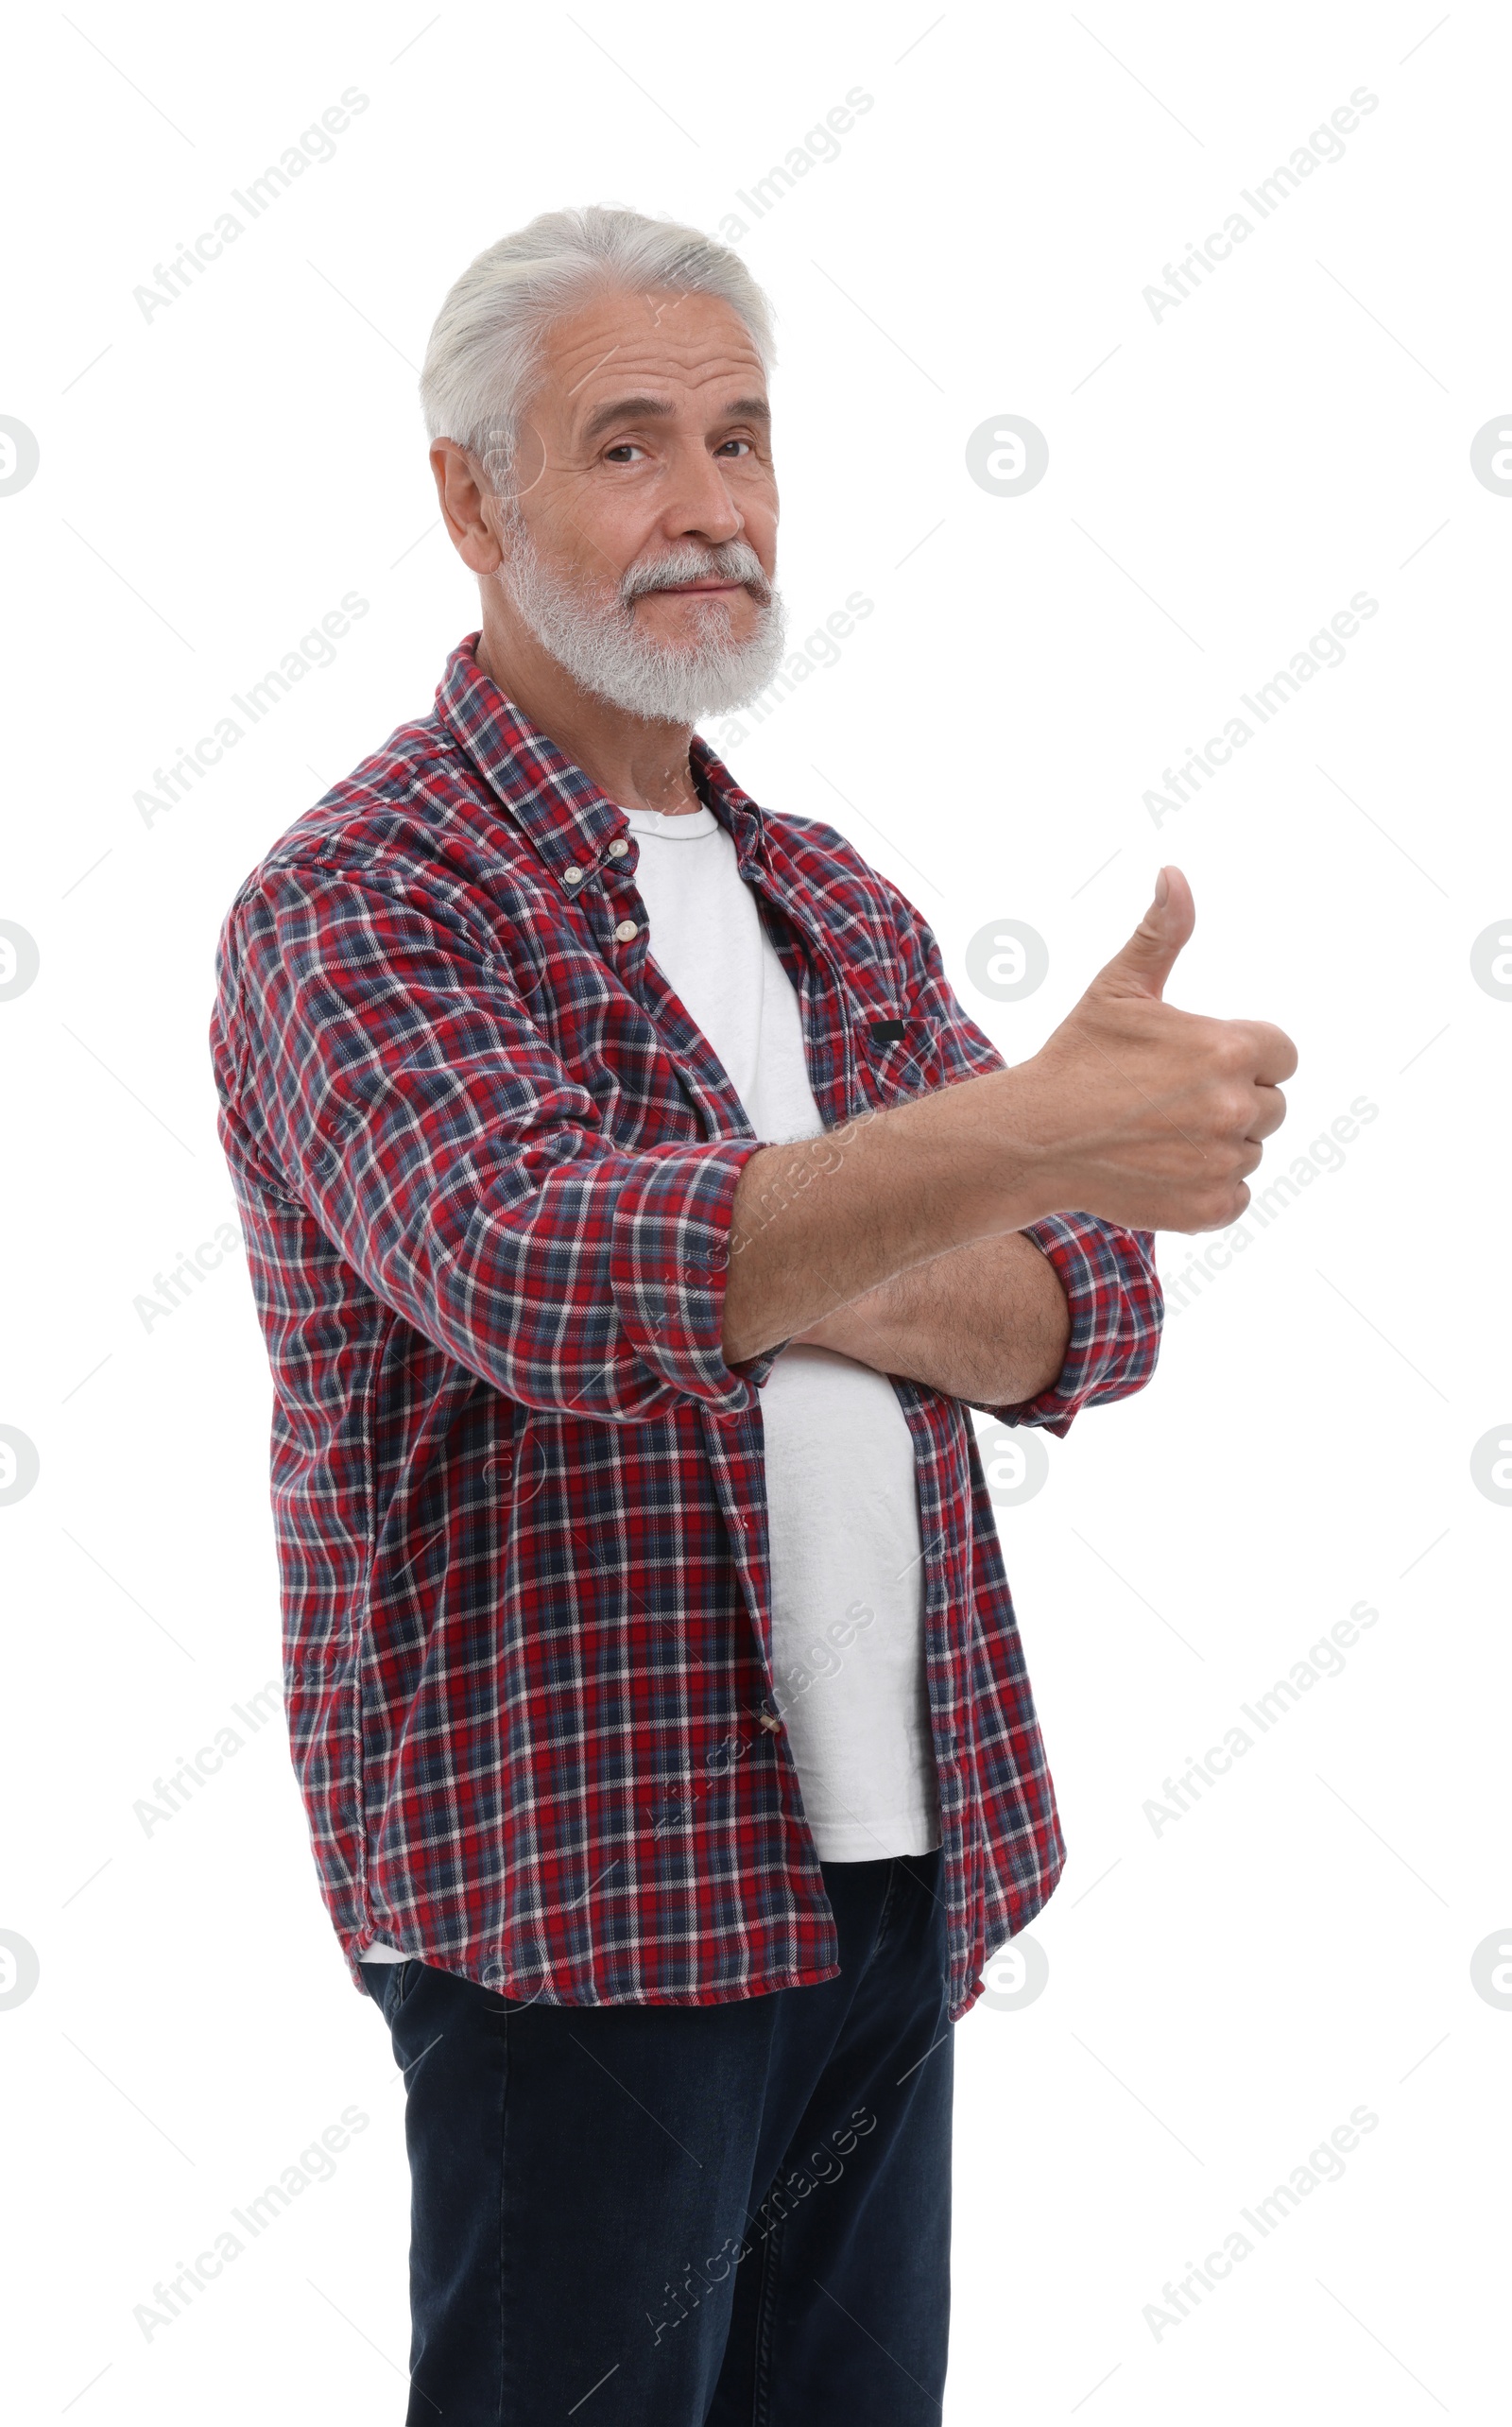 Photo of Man showing thumb up on white background